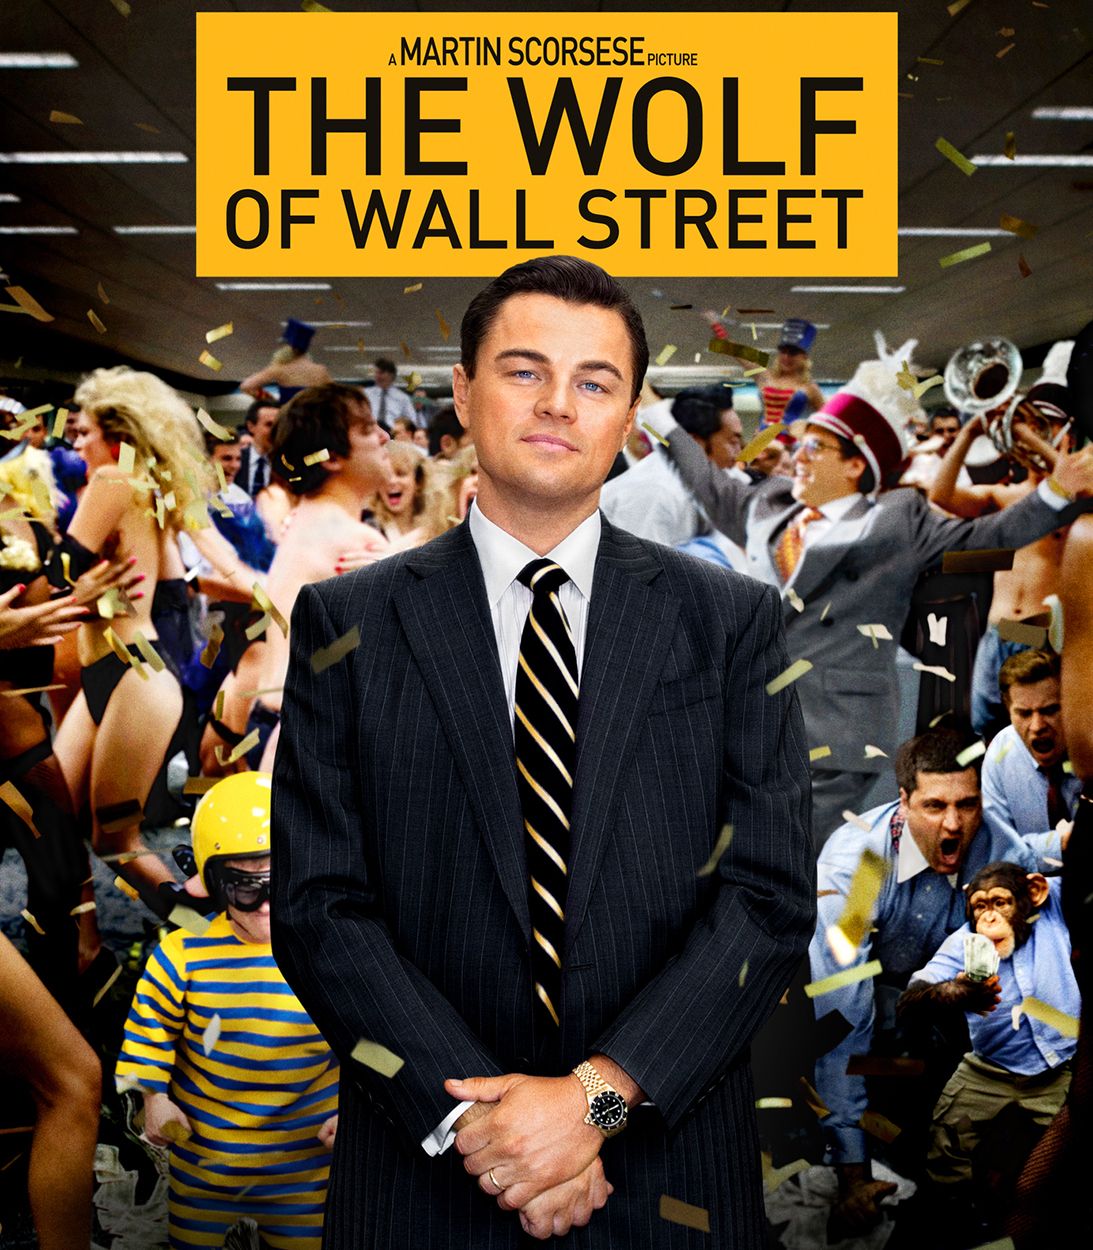 The wolf of wall street poster vertical